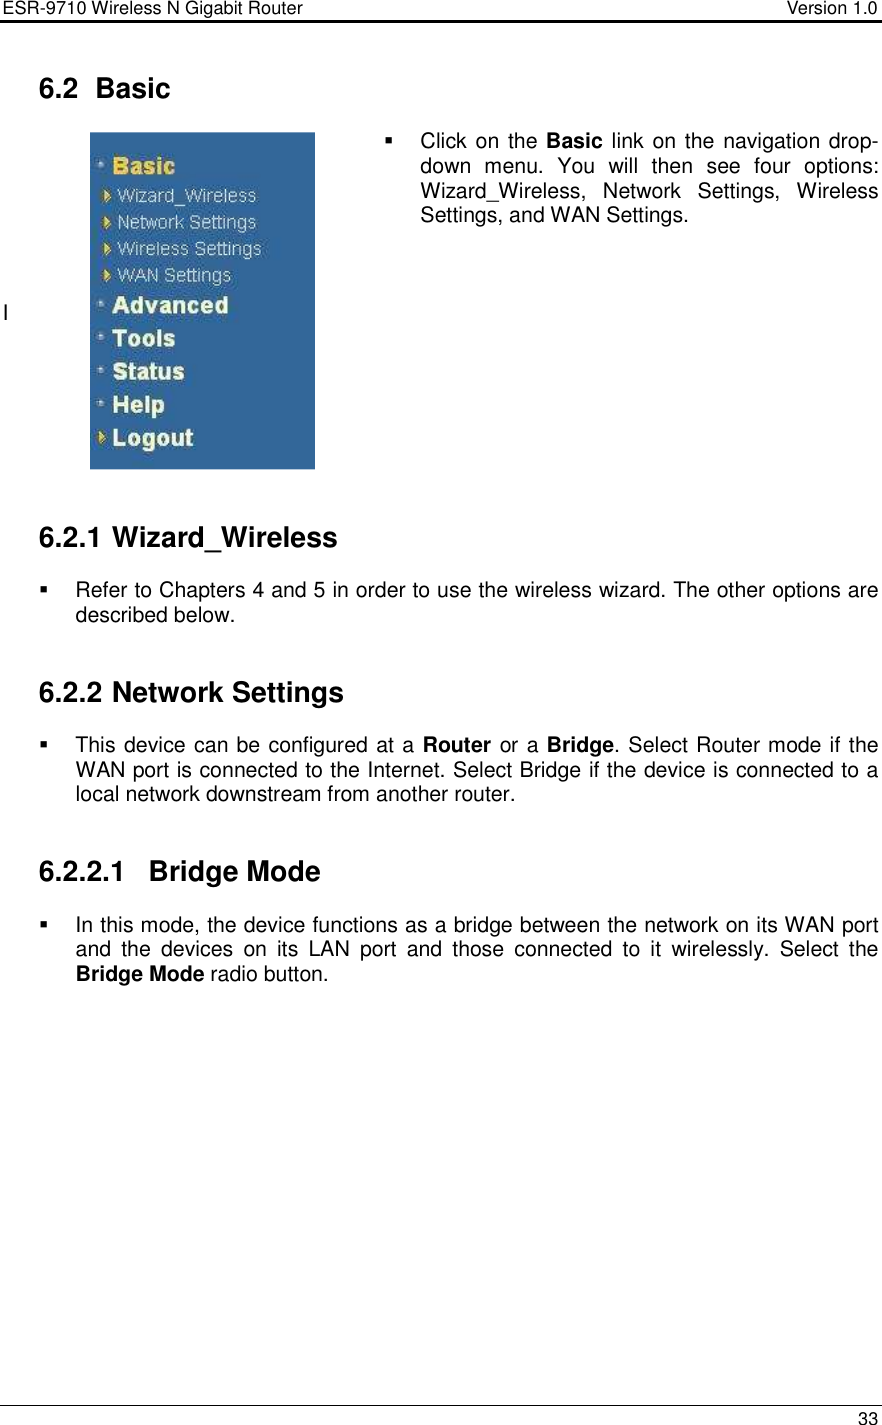 ESR-9710 Wireless N Gigabit Router                                    Version 1.0    33   6.2  Basic   Click on the Basic link on the navigation drop-down  menu.  You  will  then  see  four  options: Wizard_Wireless,  Network  Settings,  Wireless Settings, and WAN Settings.     I         6.2.1 Wizard_Wireless   Refer to Chapters 4 and 5 in order to use the wireless wizard. The other options are described below.   6.2.2 Network Settings   This device can be configured at a Router or a Bridge. Select Router mode if the WAN port is connected to the Internet. Select Bridge if the device is connected to a local network downstream from another router.    6.2.2.1  Bridge Mode   In this mode, the device functions as a bridge between the network on its WAN port and  the  devices  on  its  LAN  port  and  those  connected  to  it  wirelessly.  Select  the Bridge Mode radio button.   